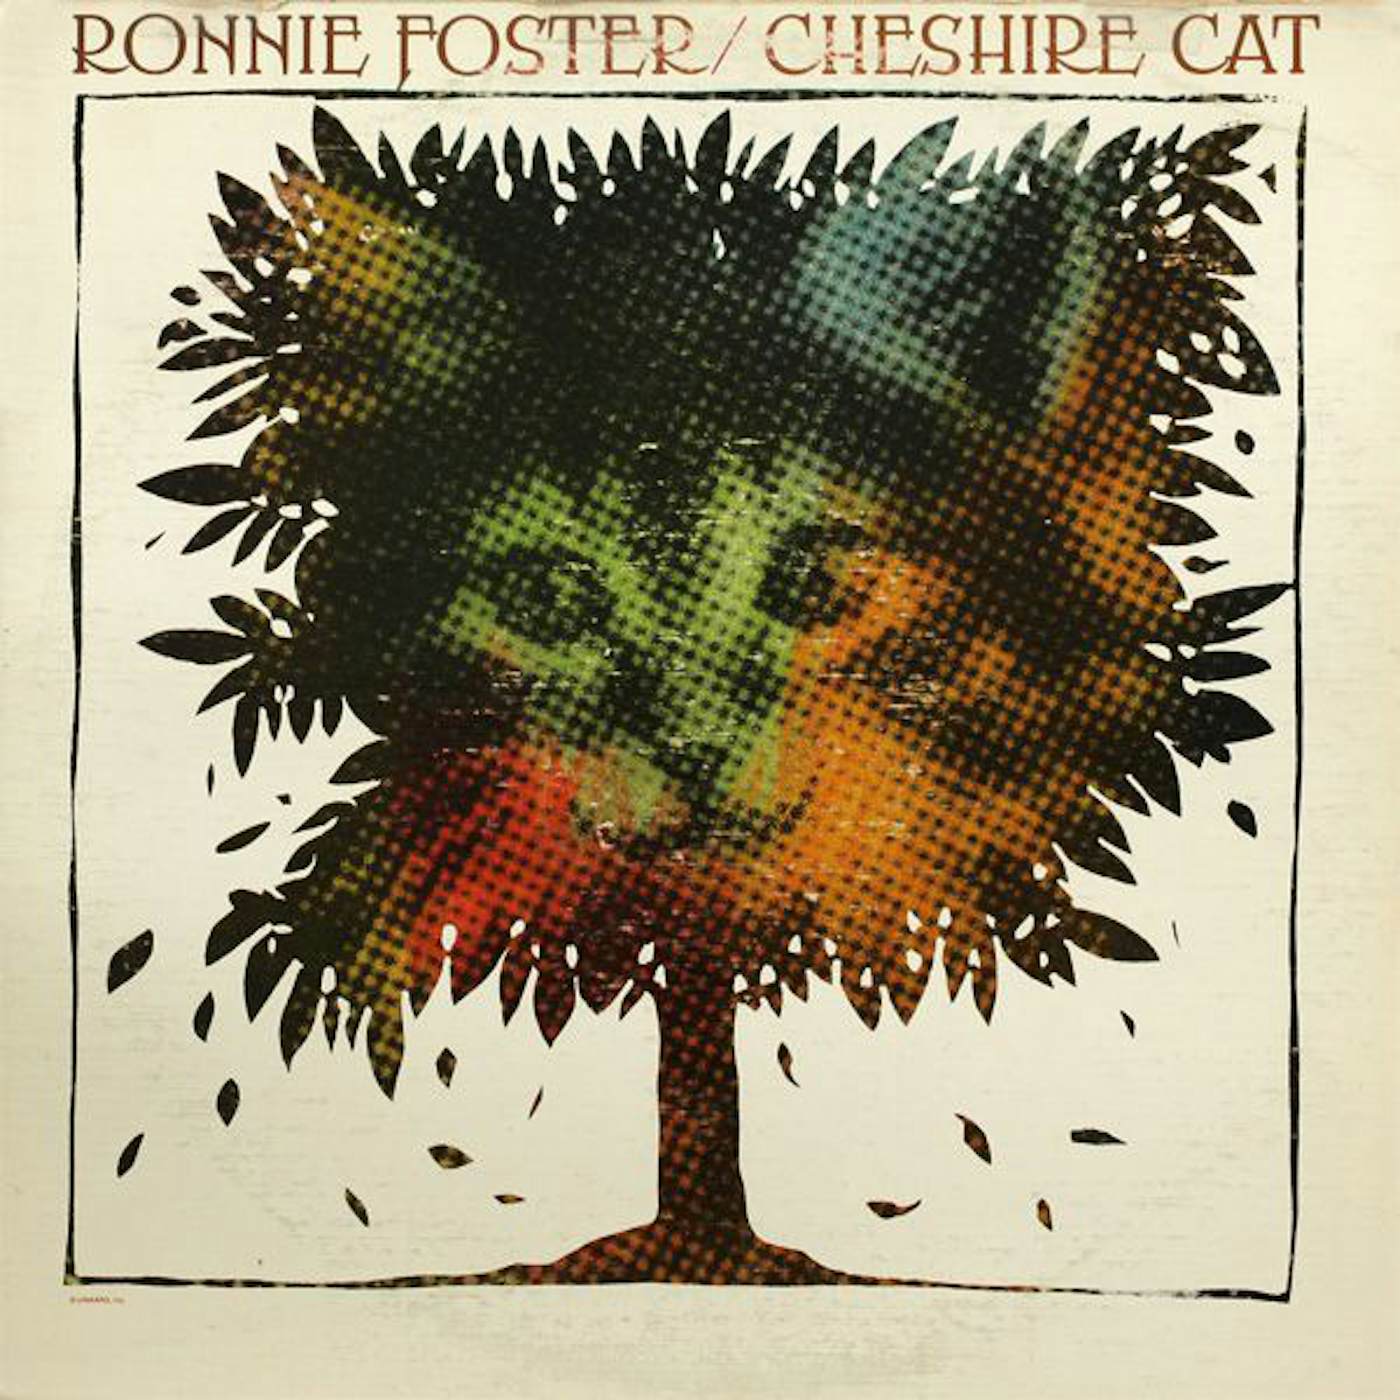 Ronnie Foster CHESHIRE CAT CD